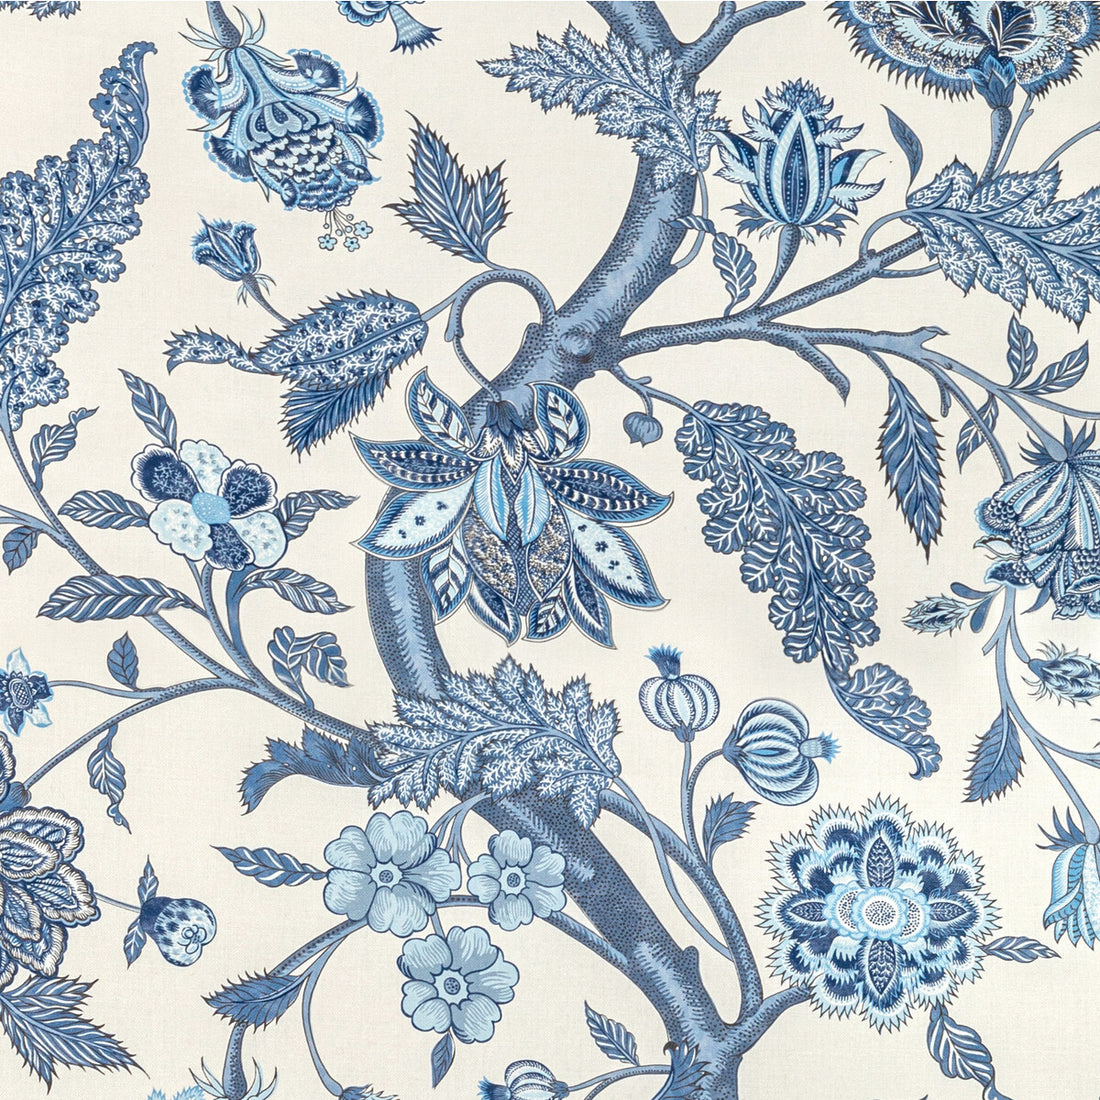 Palampore Print fabric in delft color - pattern 2022109.5.0 - by Lee Jofa in the Sarah Bartholomew collection